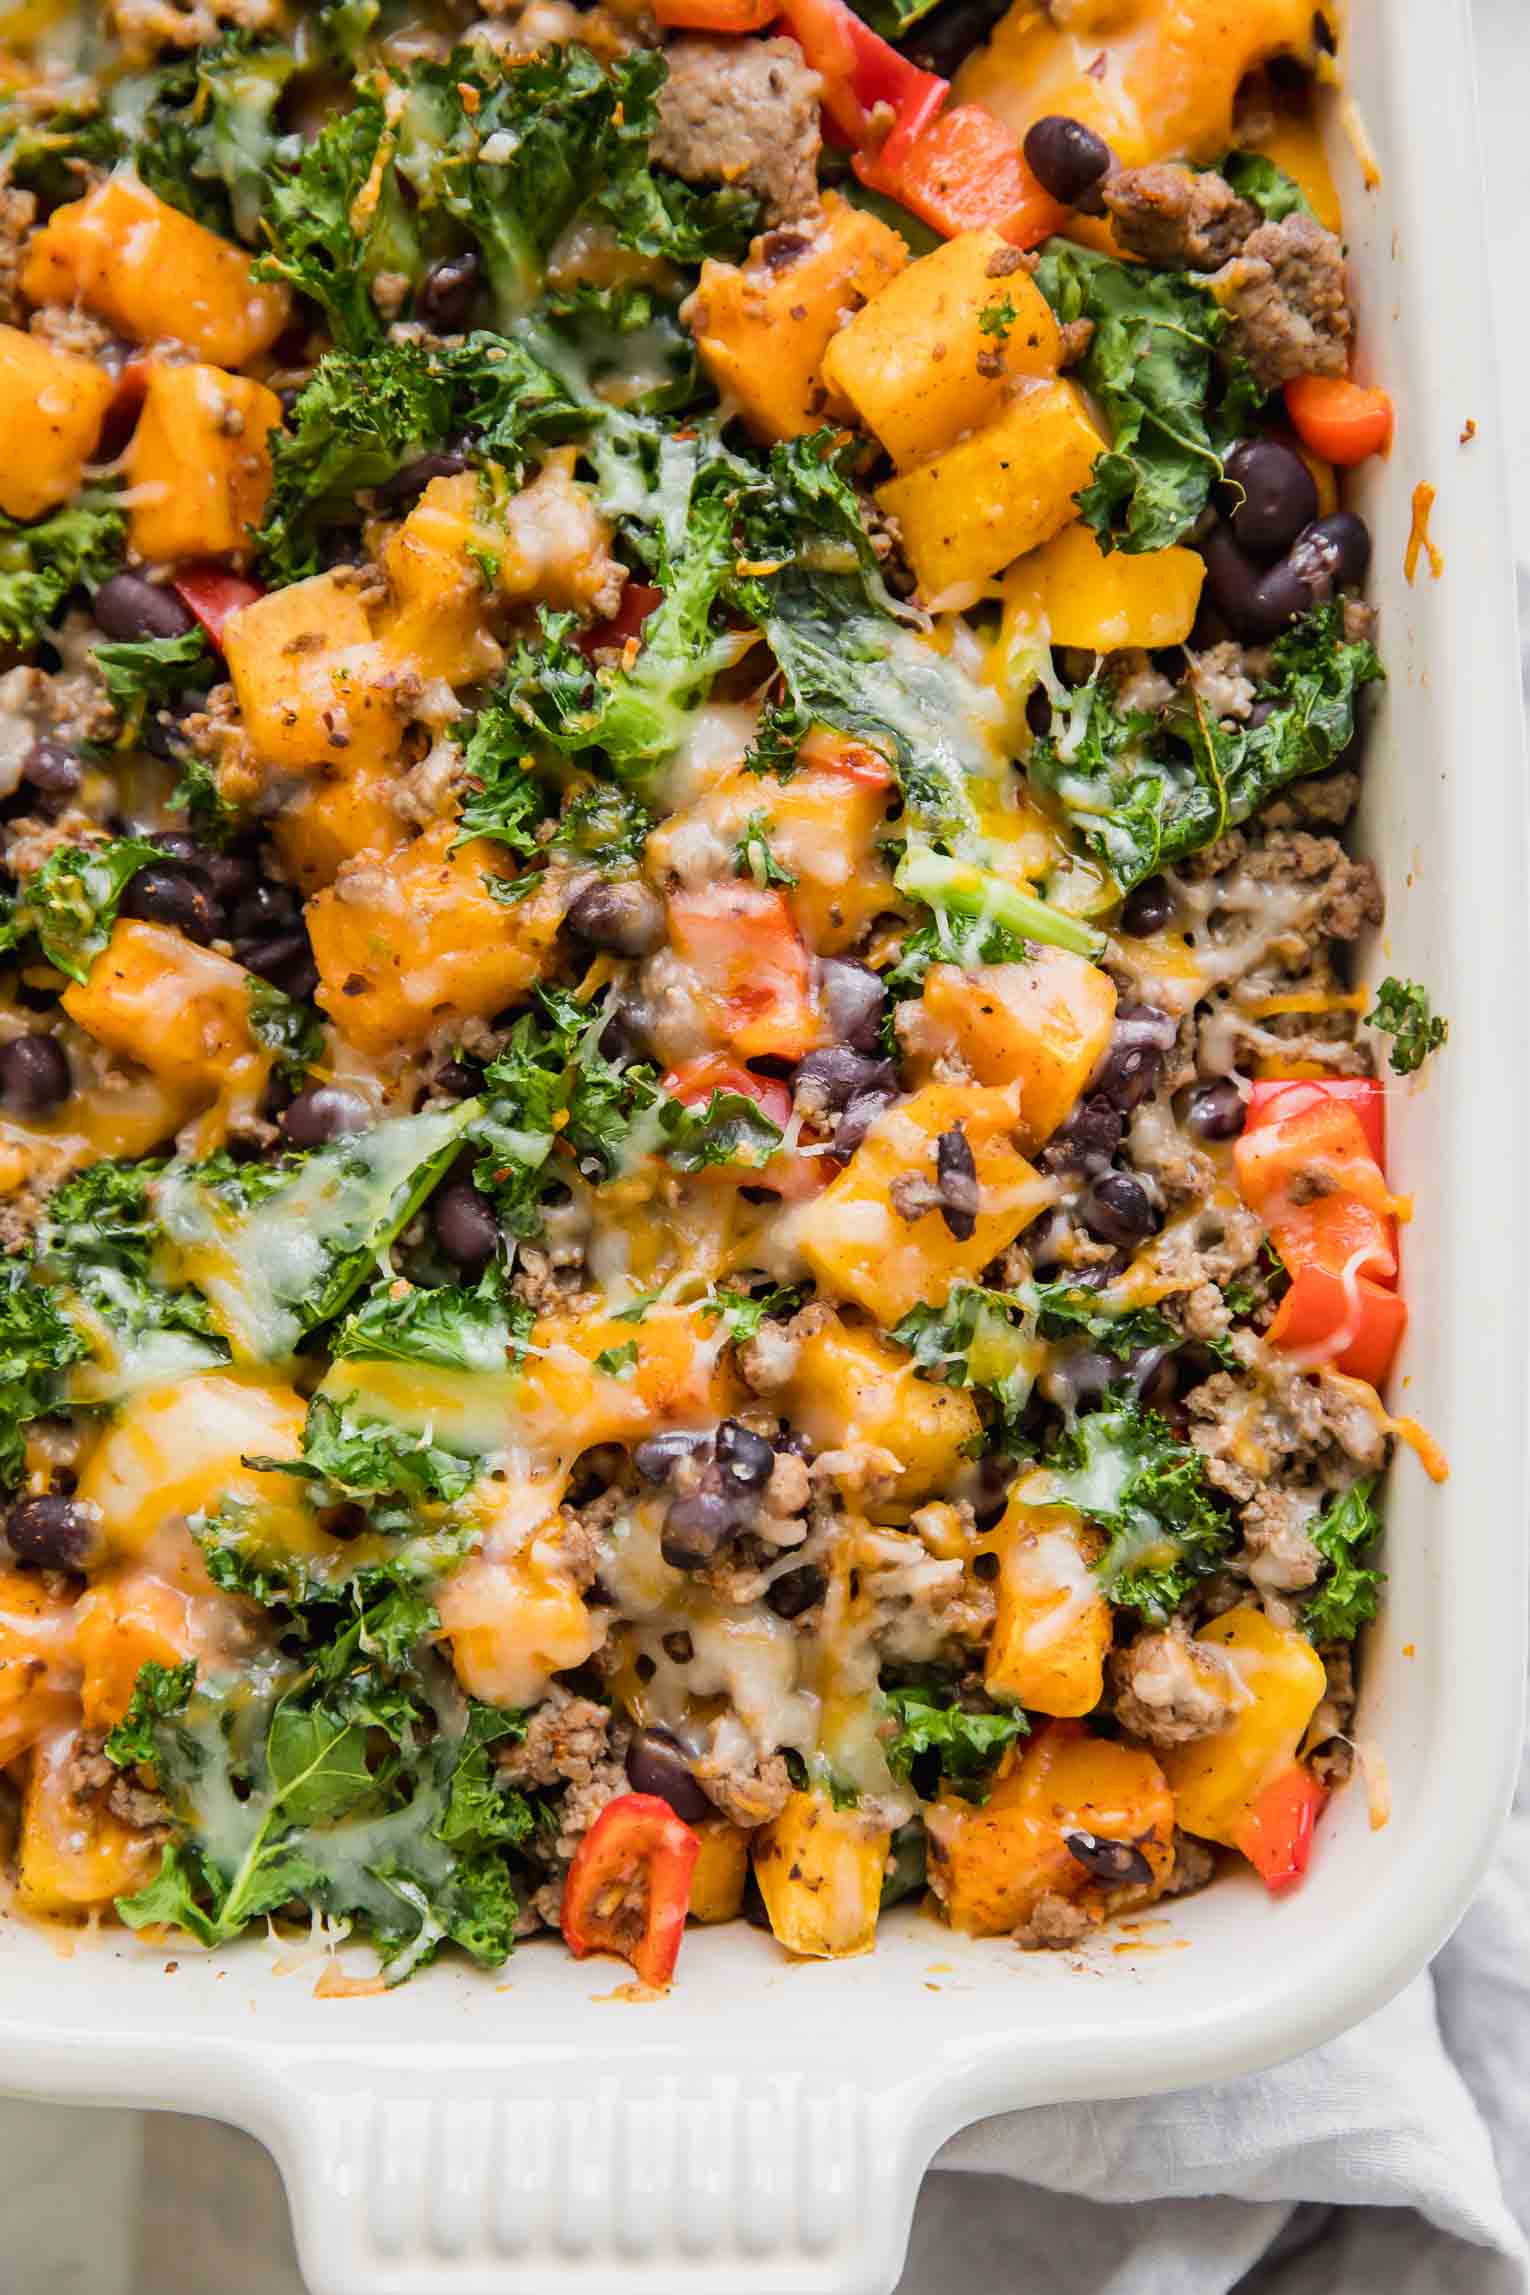 20 Healthy Ground Beef Recipes